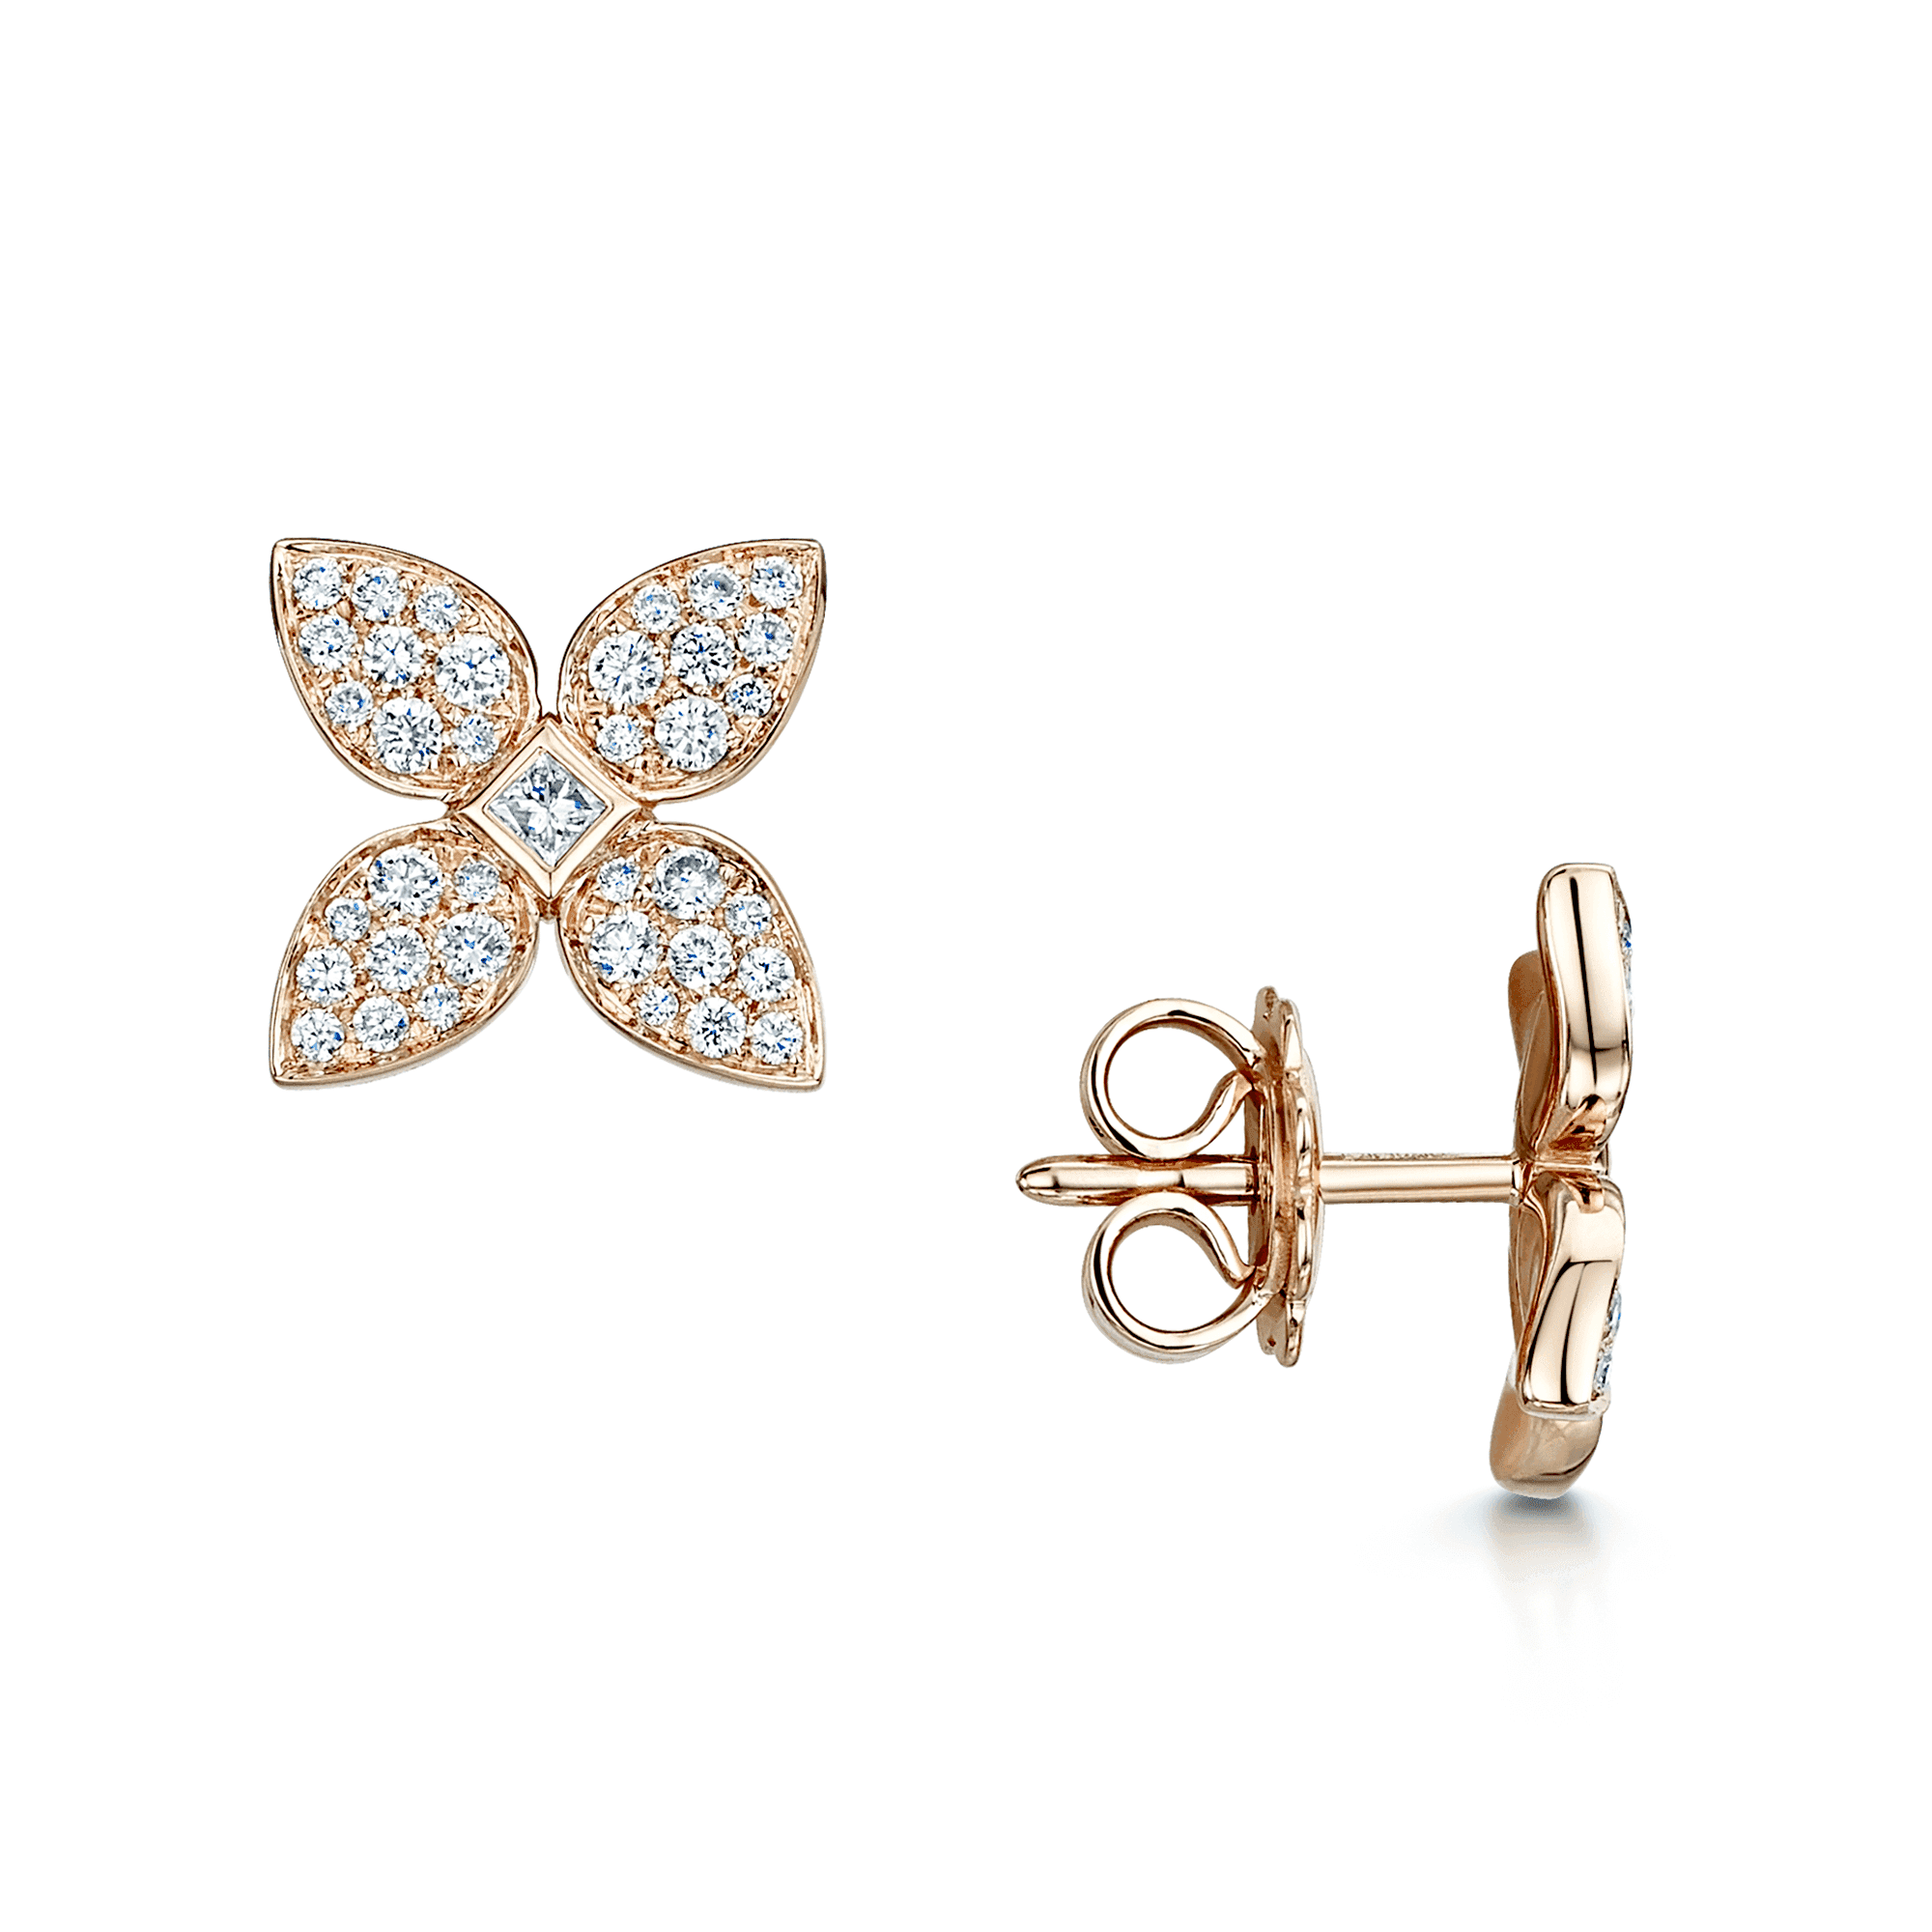 18ct Rose Gold Flower Stud Earrings With Diamond Pave Set Petals